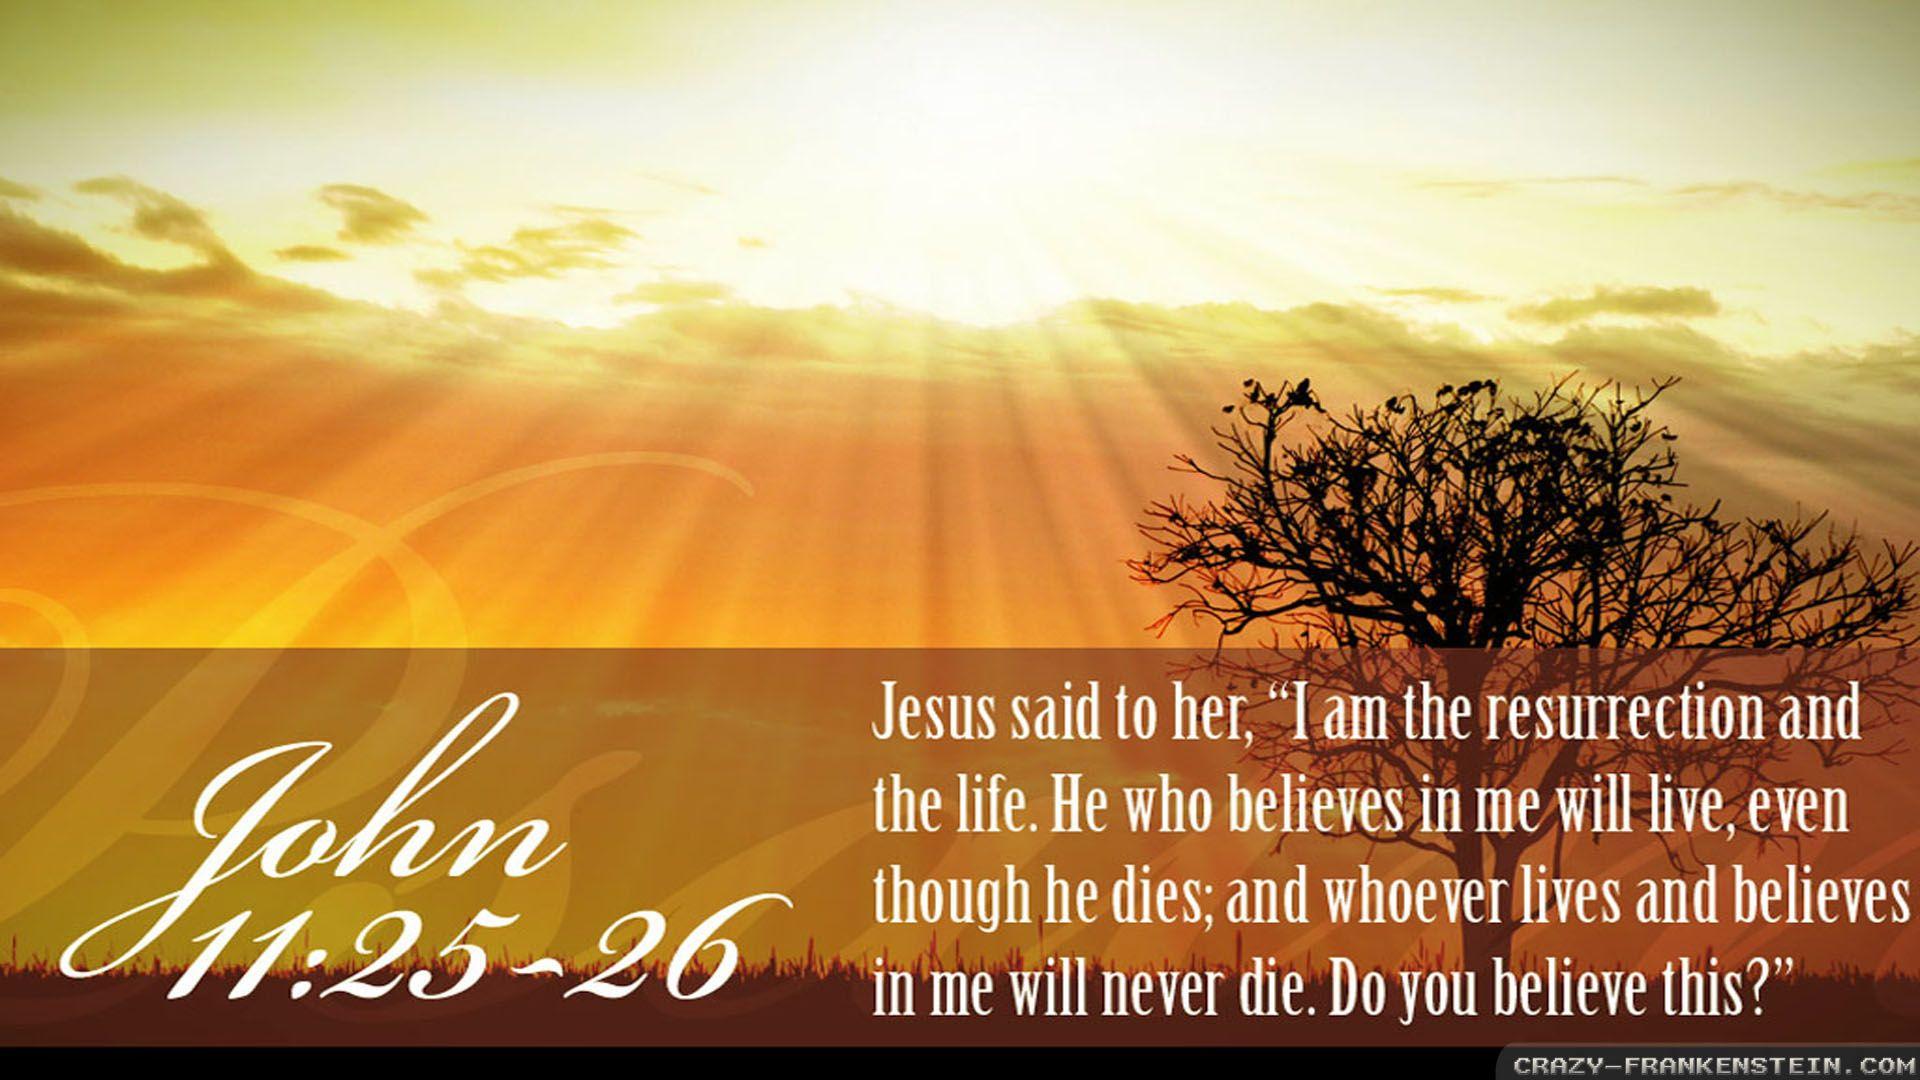 Easter Quotes wallpapers 2